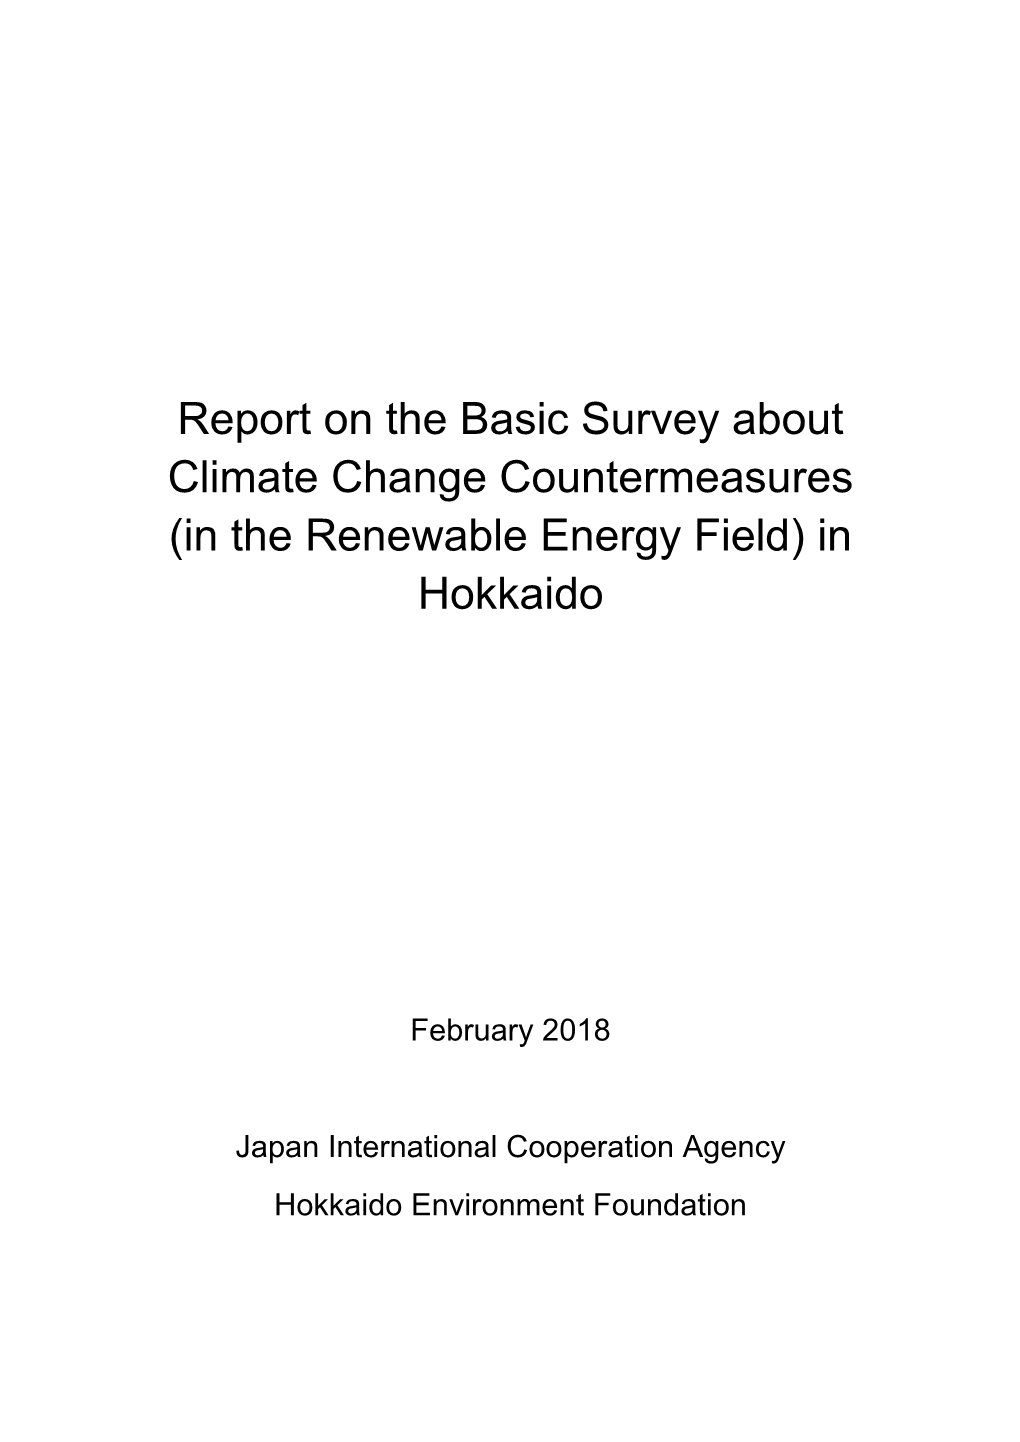 Report on the Basic Survey About Climate Change Countermeasures (In the Renewable Energy Field) in Hokkaido